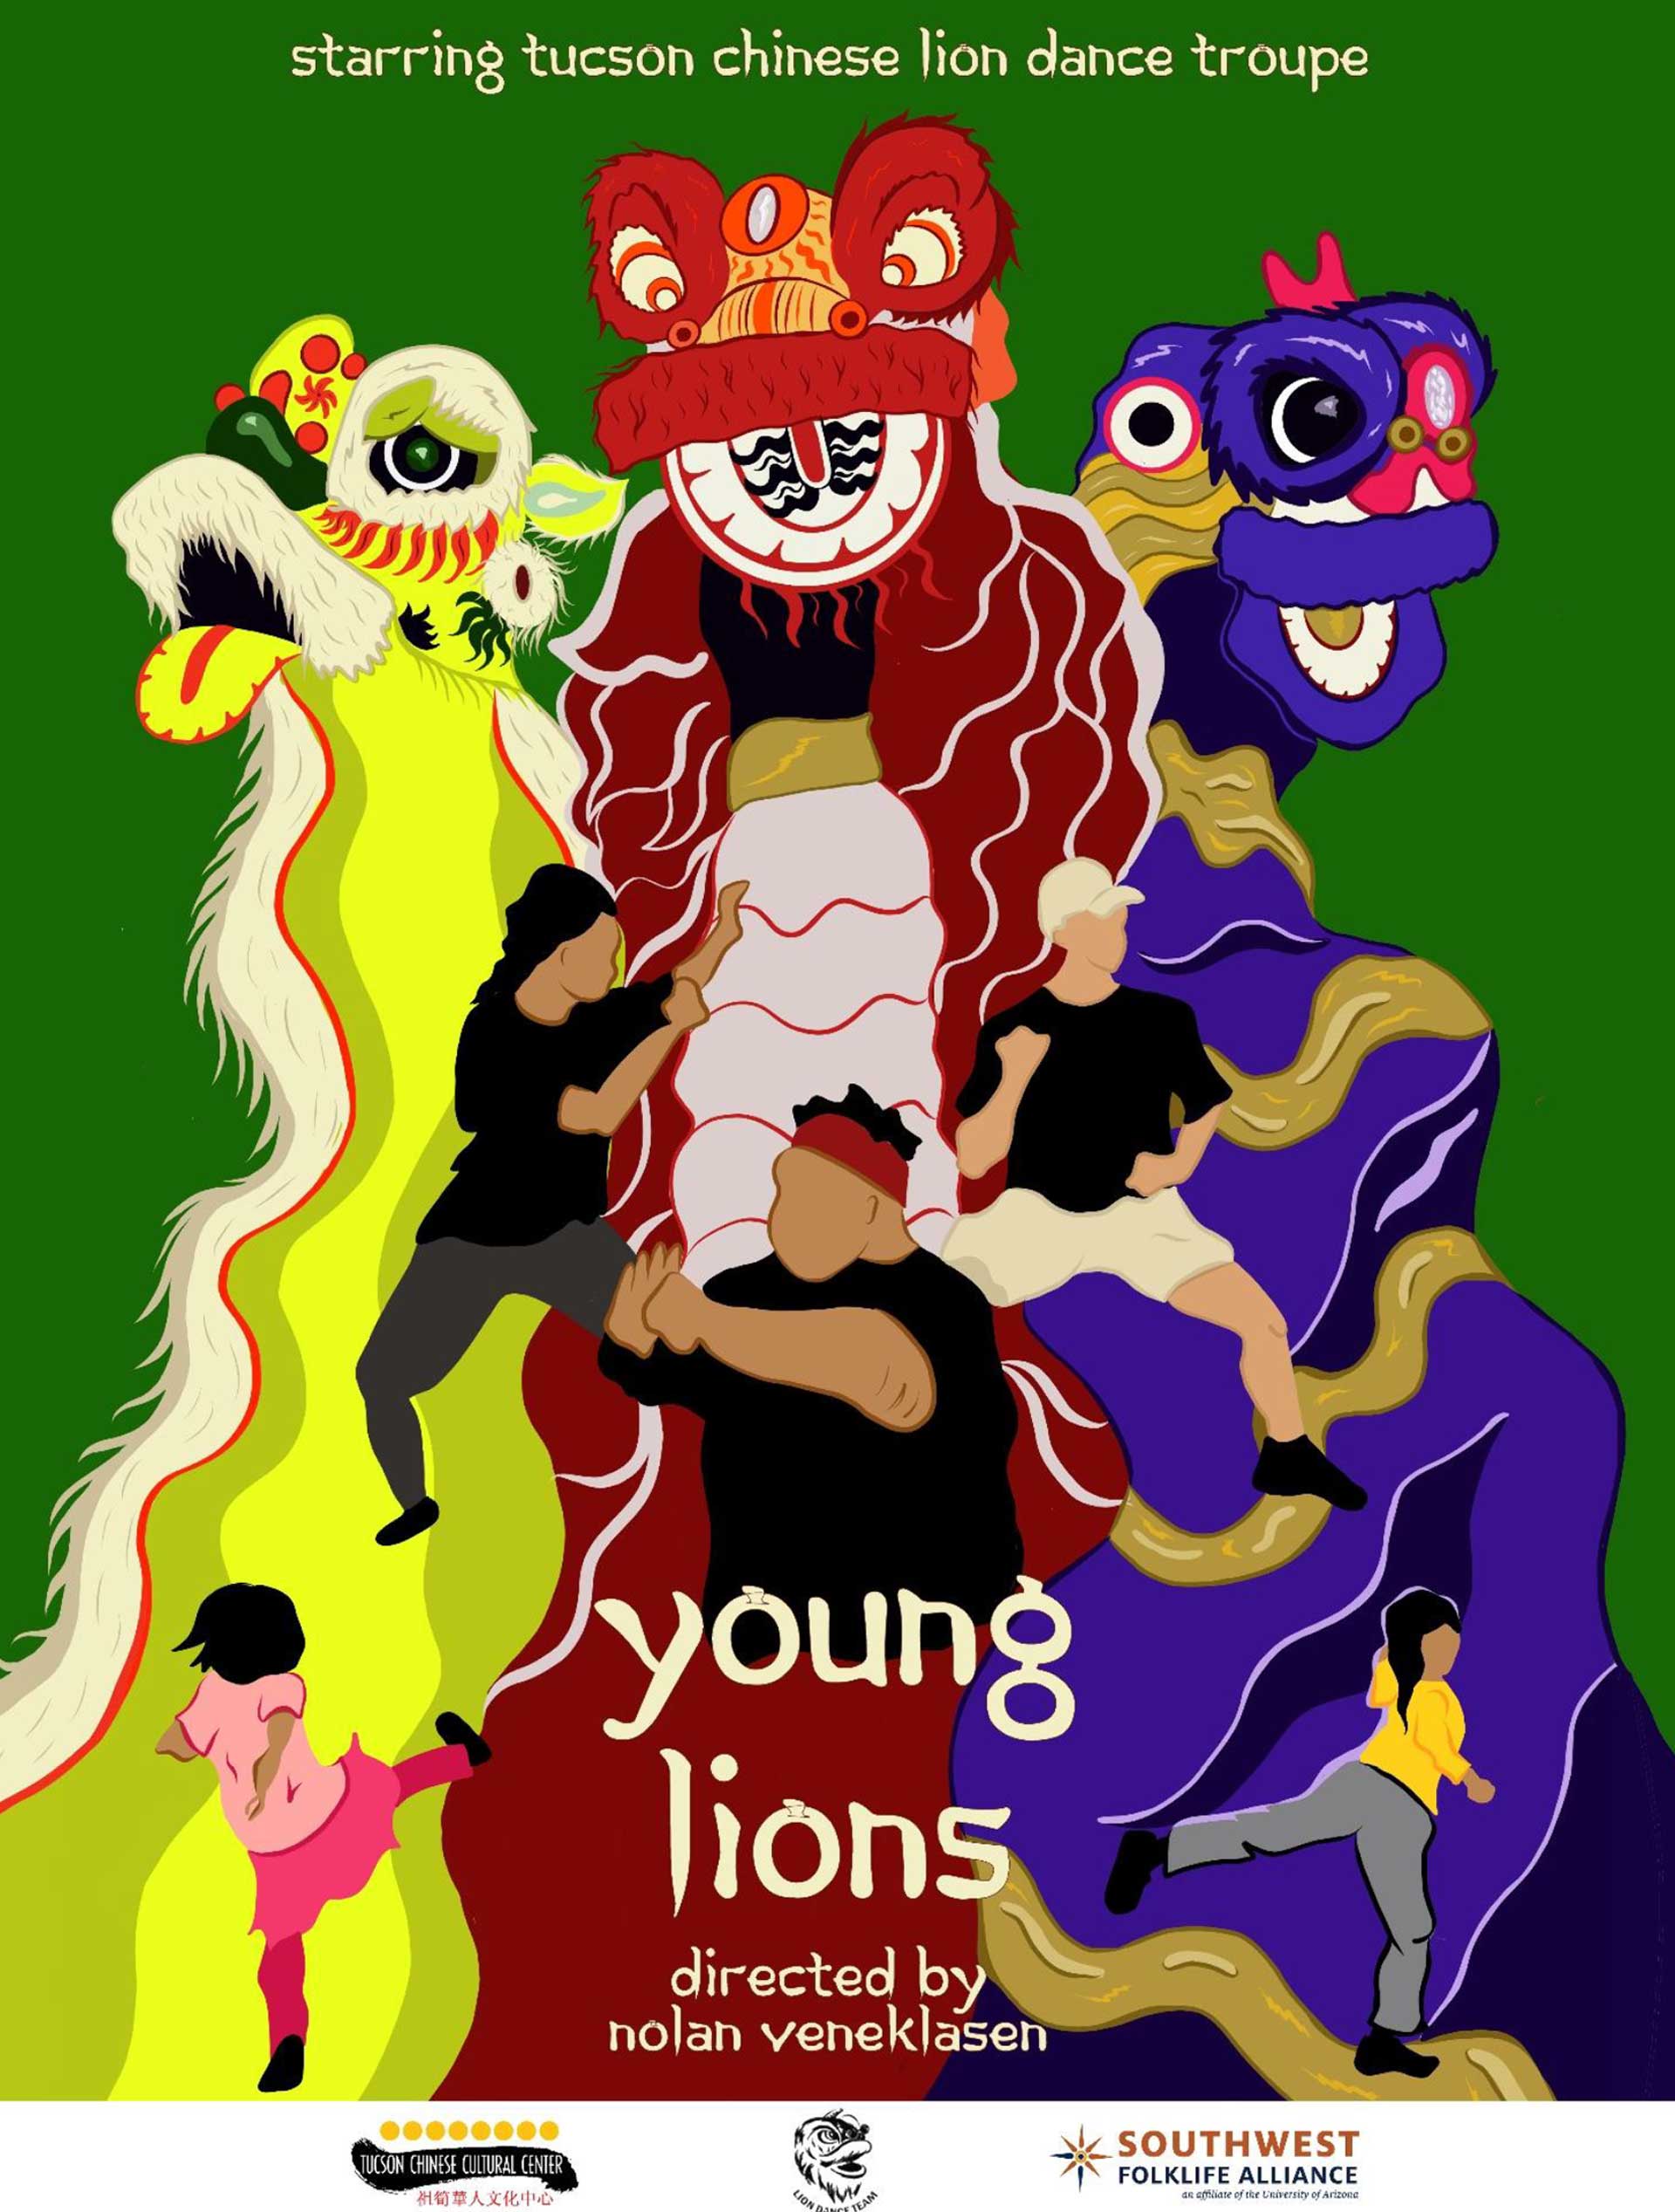 Tucson Chinese Lion Dance Troupe POSTER